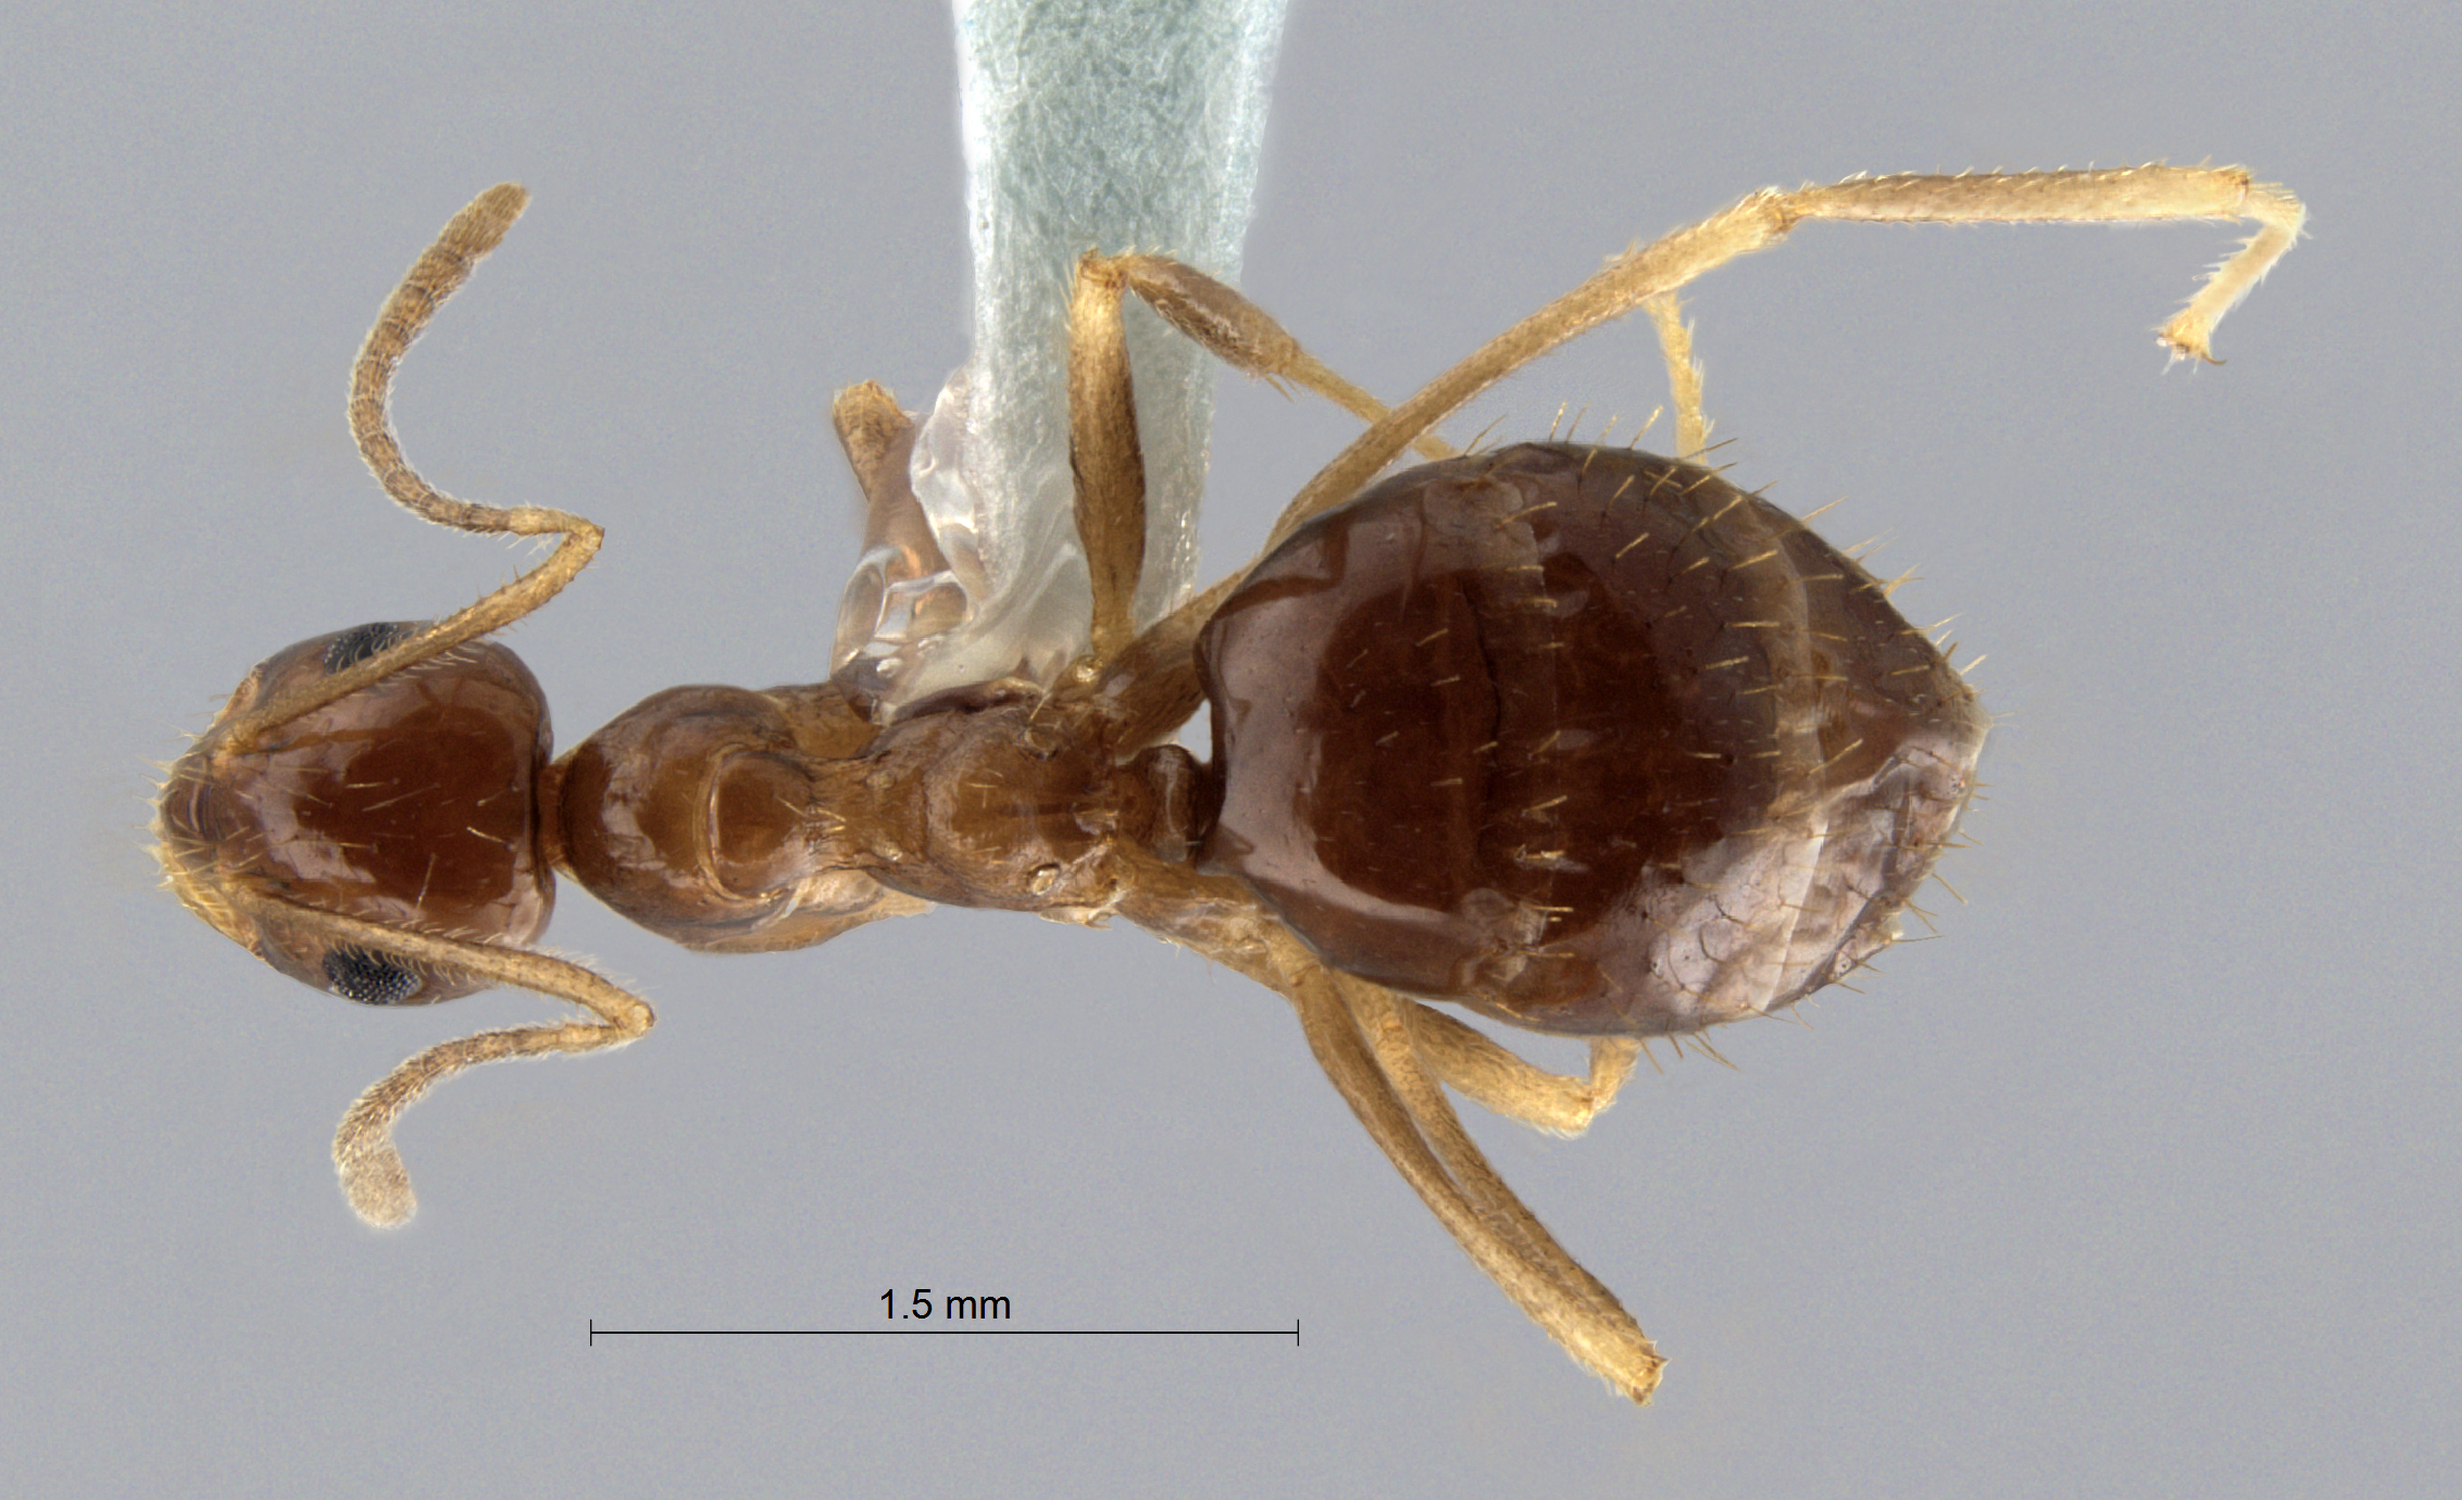 Colobopsis nipponica